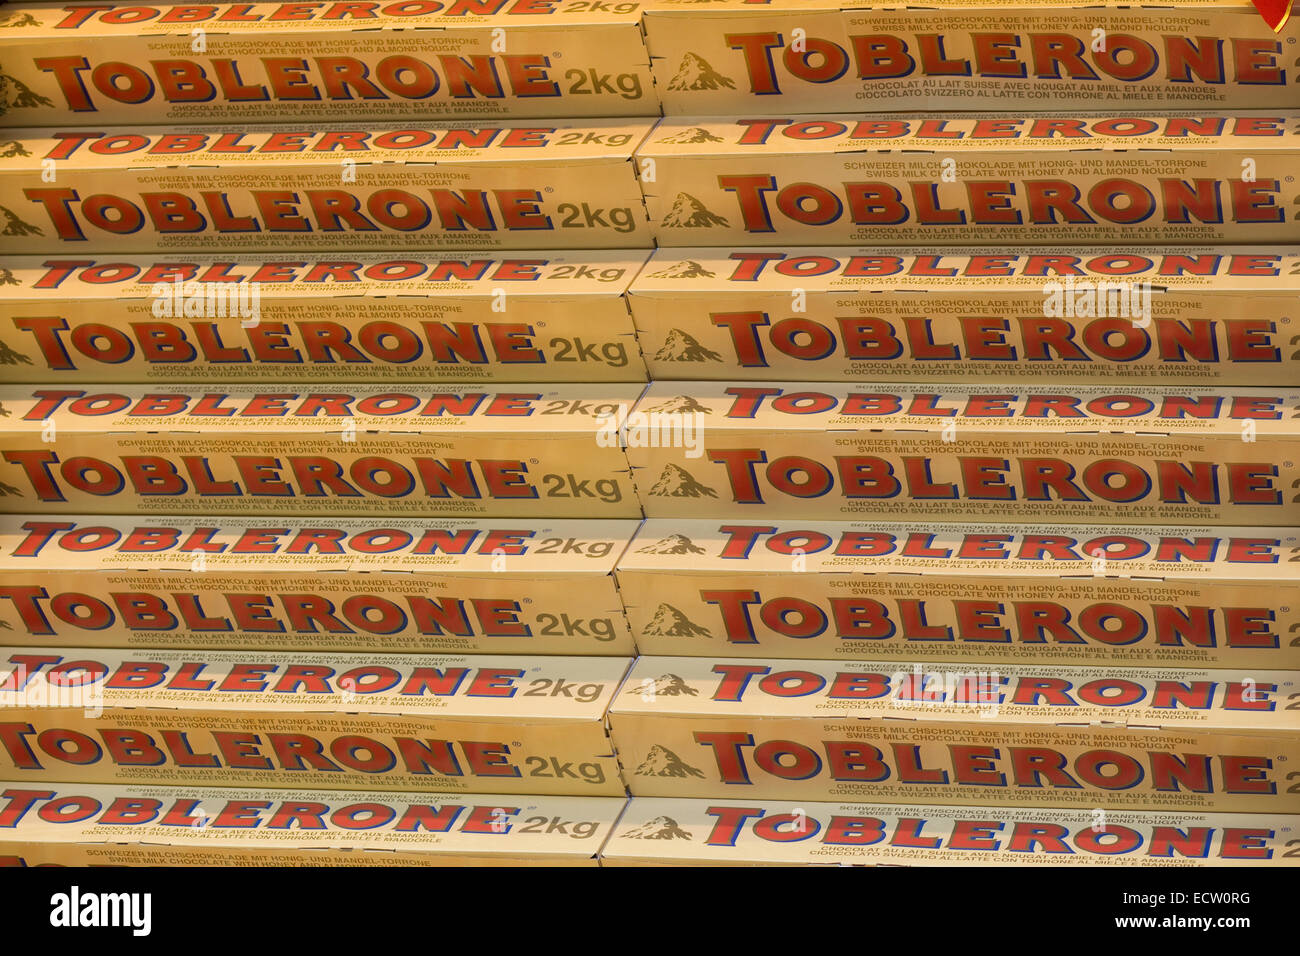 Giant Chocolate and Candy Bars Toblerone Stock Photo